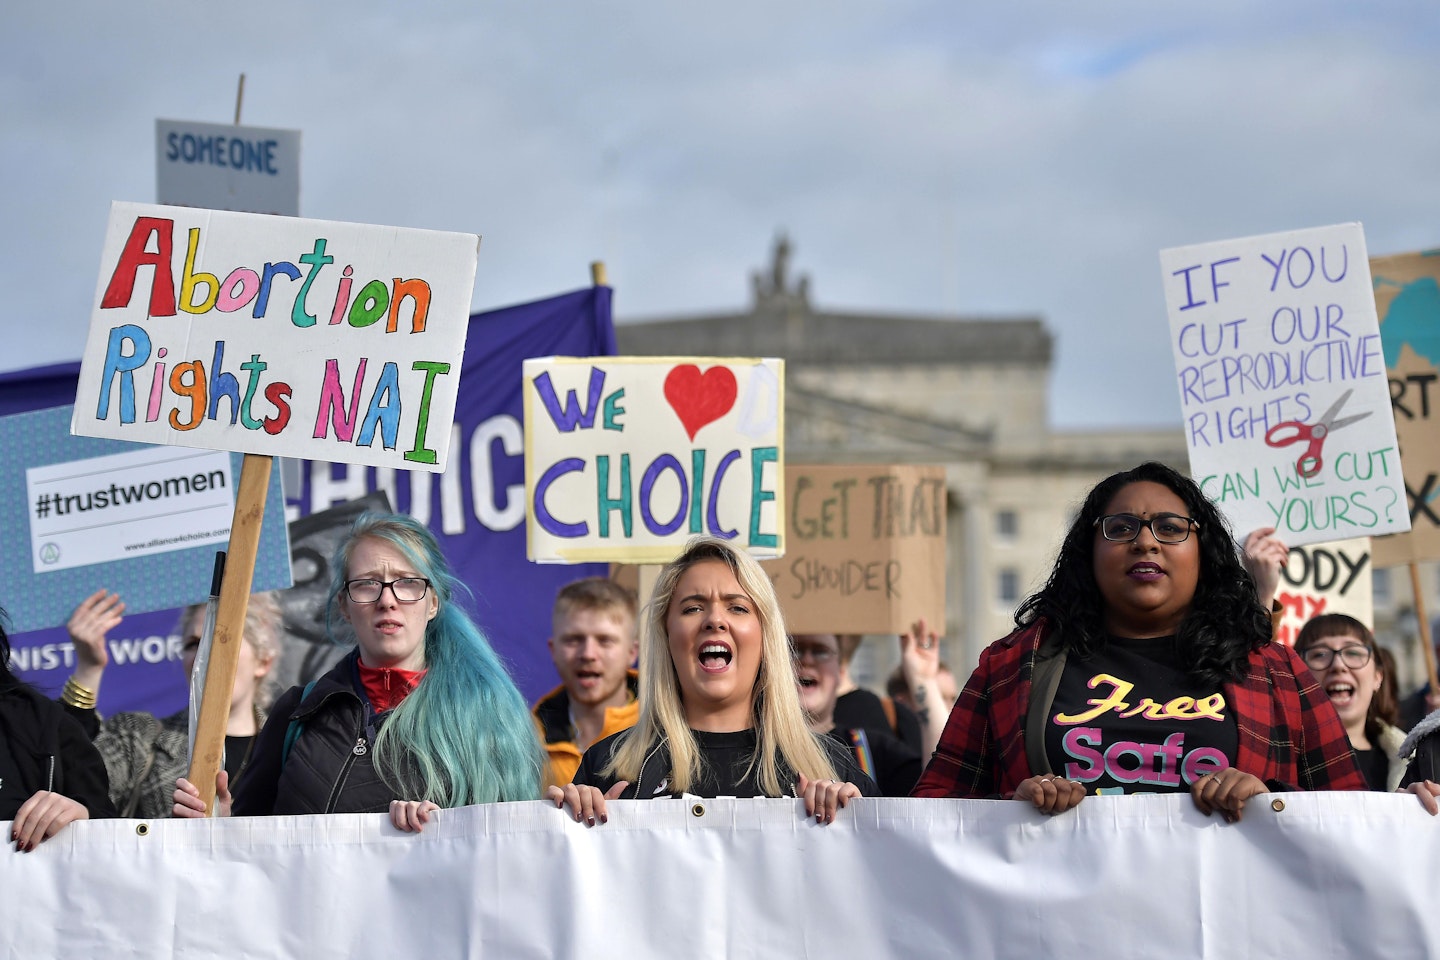 Abortion rights in Northern Ireland 